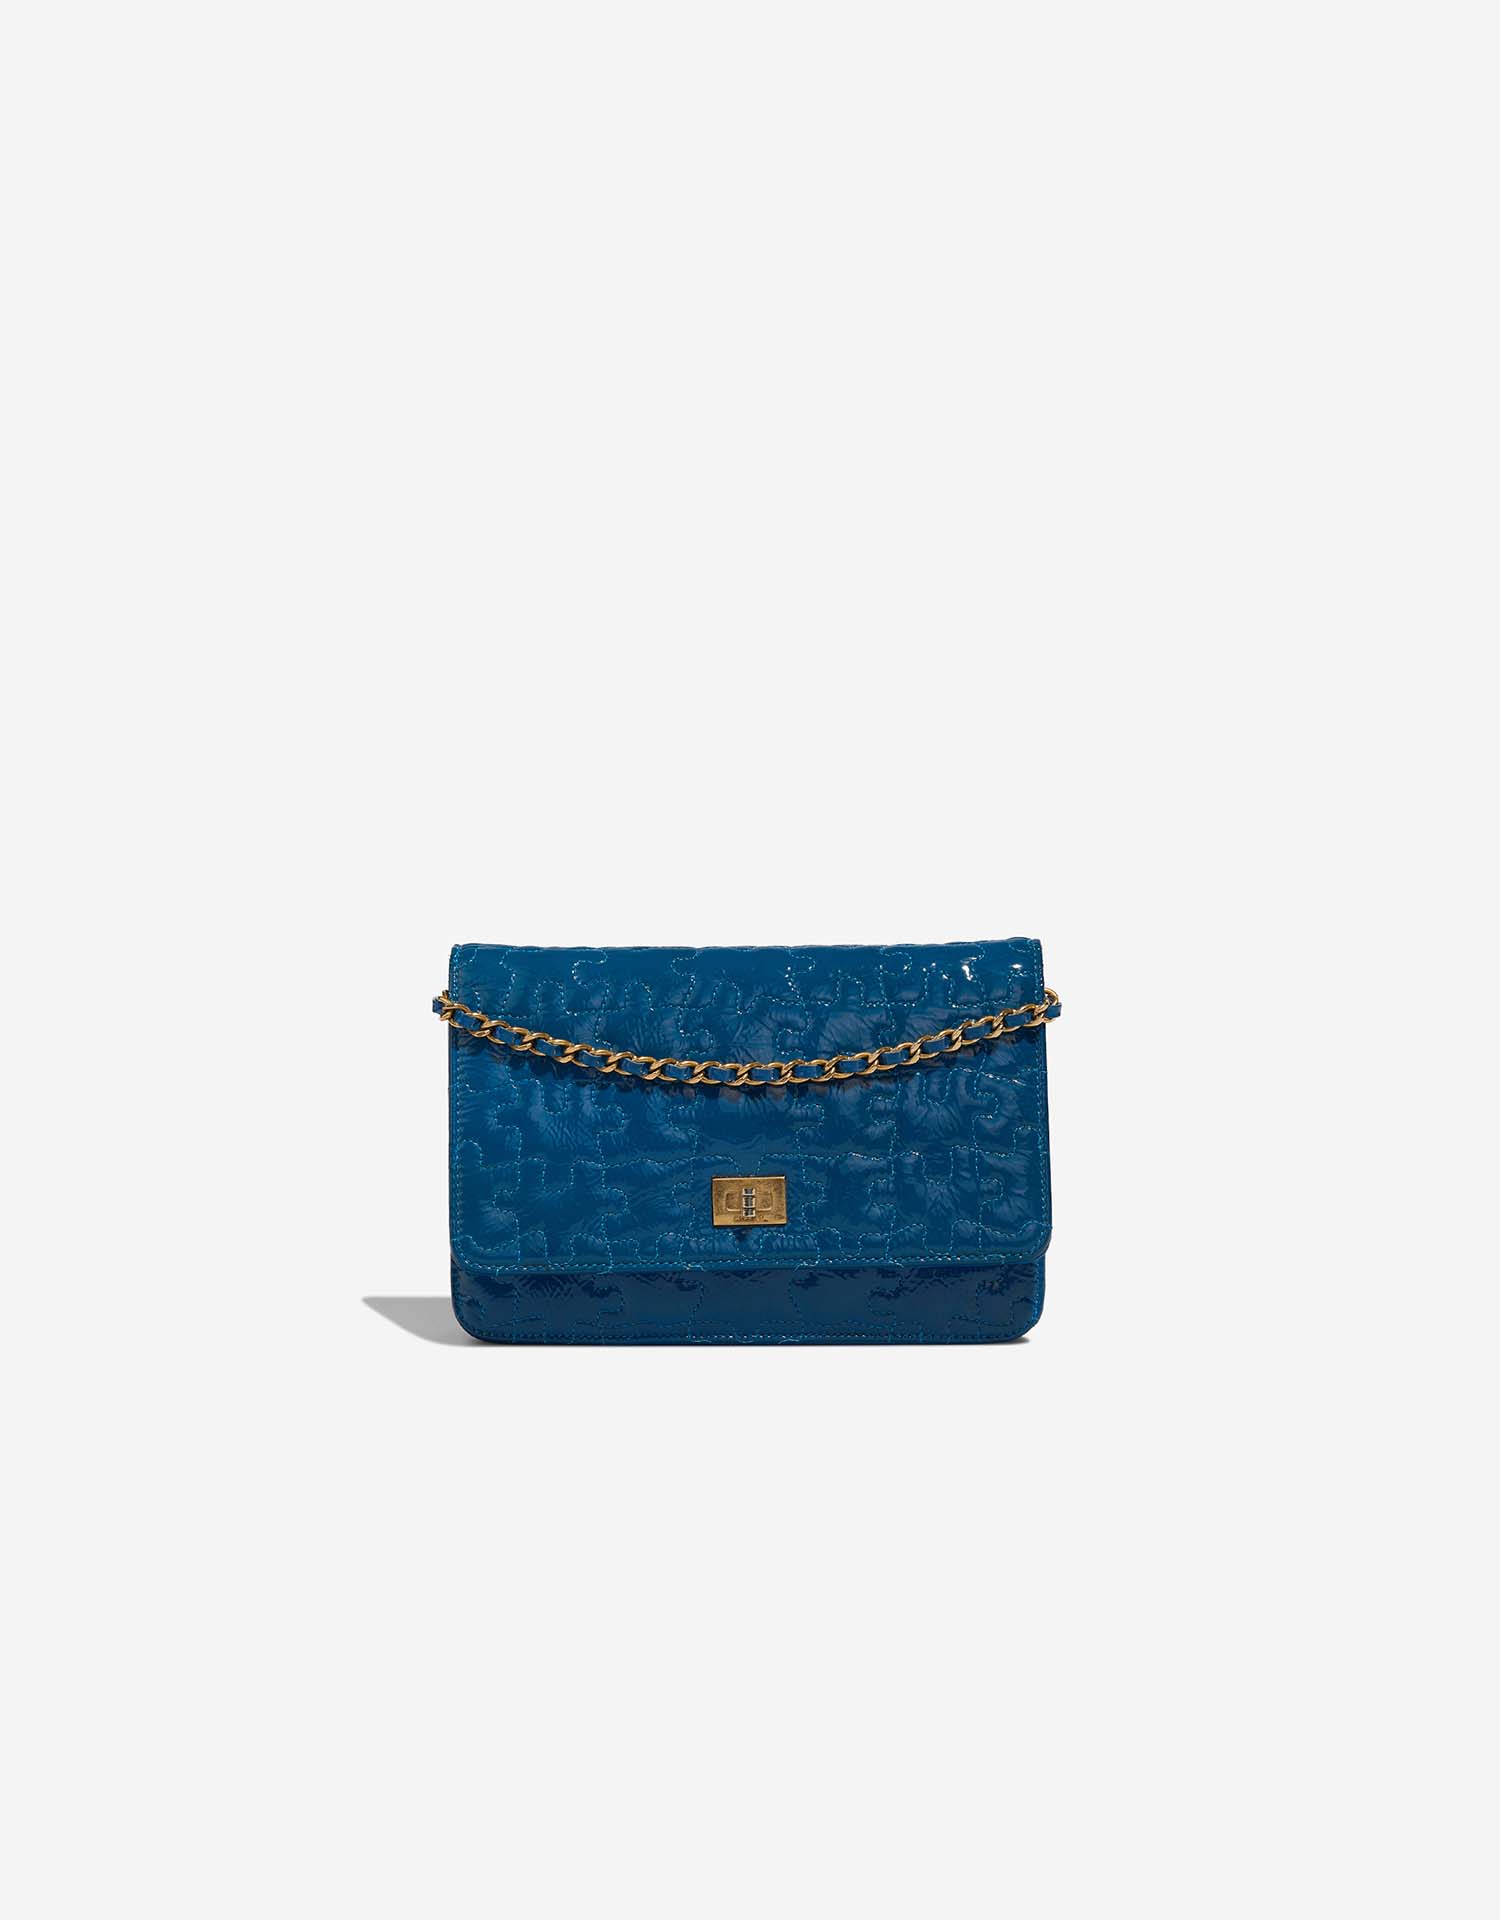 Chanel 2.55 Reissue Wallet On Chain Patent Blue